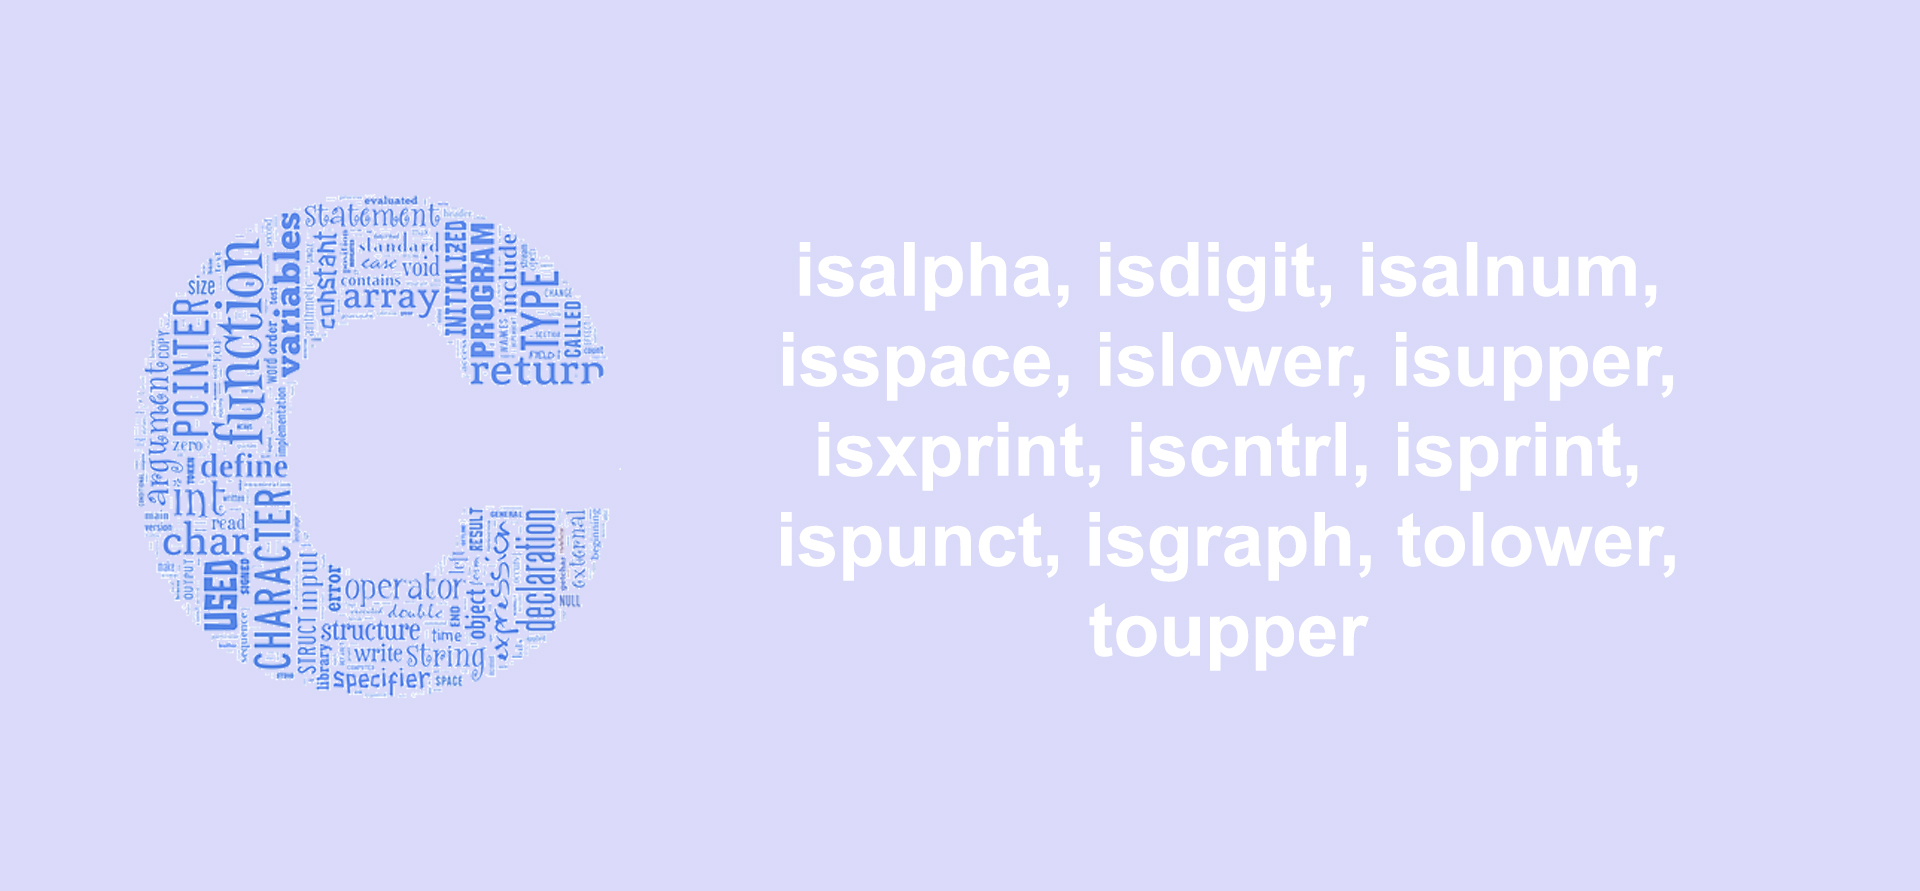 Looking at The Source Code for Function isalpha, isdigit, isalnum, isspace, islower, isupper, isxdigit, iscntrl, isprint, ispunct, isgraph, tolower, and, toupper in C Programming